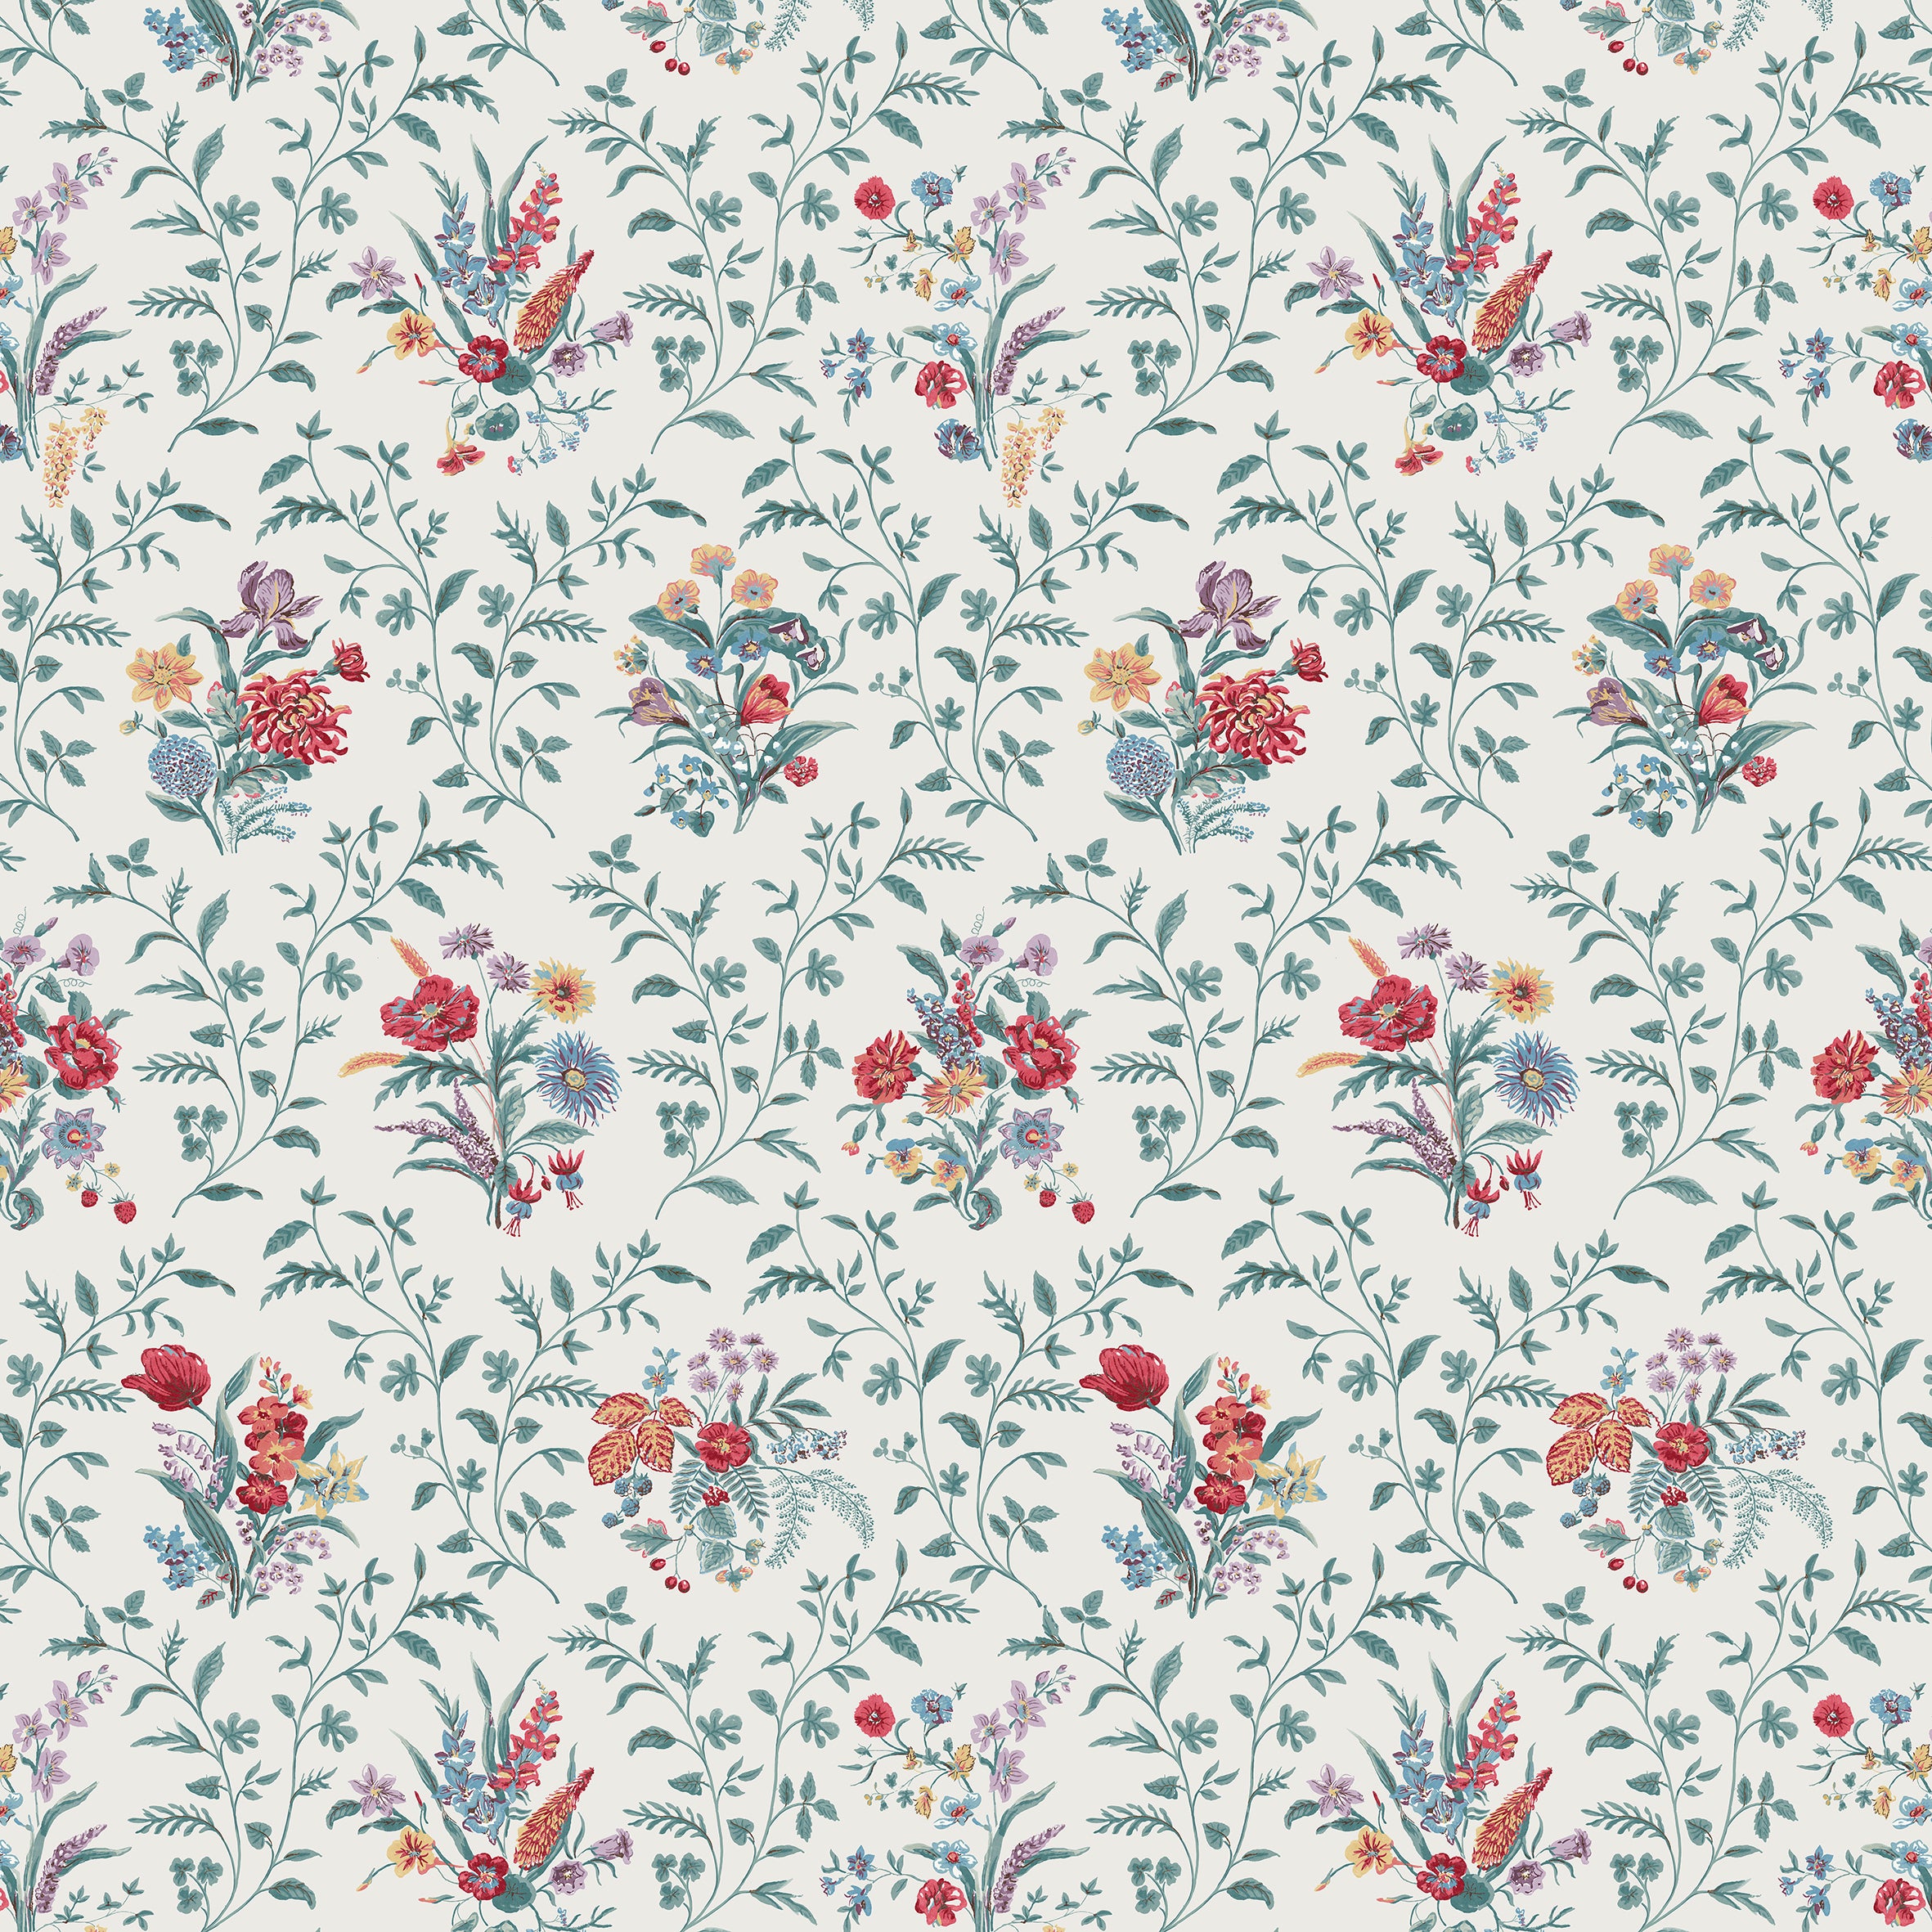 Nina Campbell Fabric - Dallimore Hollingbourne Teal/Red/Amethyst NCF4535-02